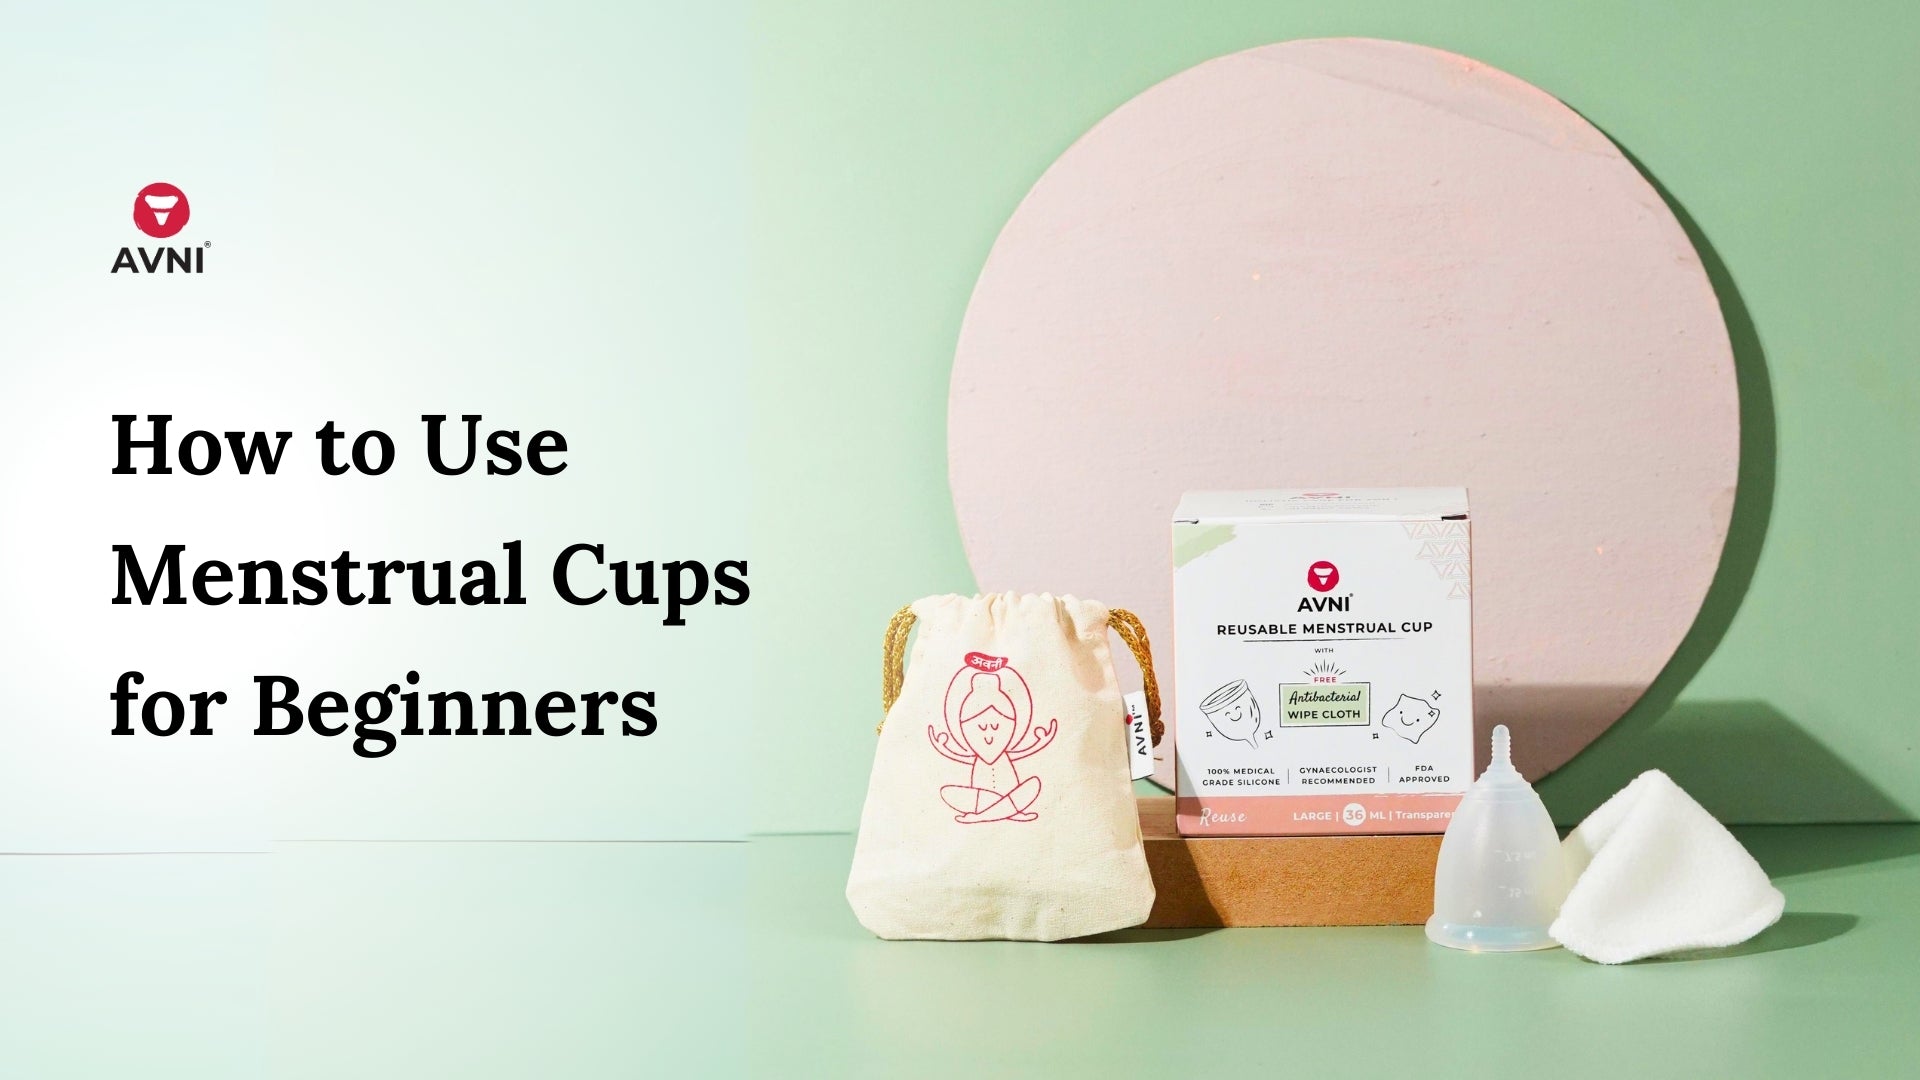 How to Use Menstrual Cups for Beginners